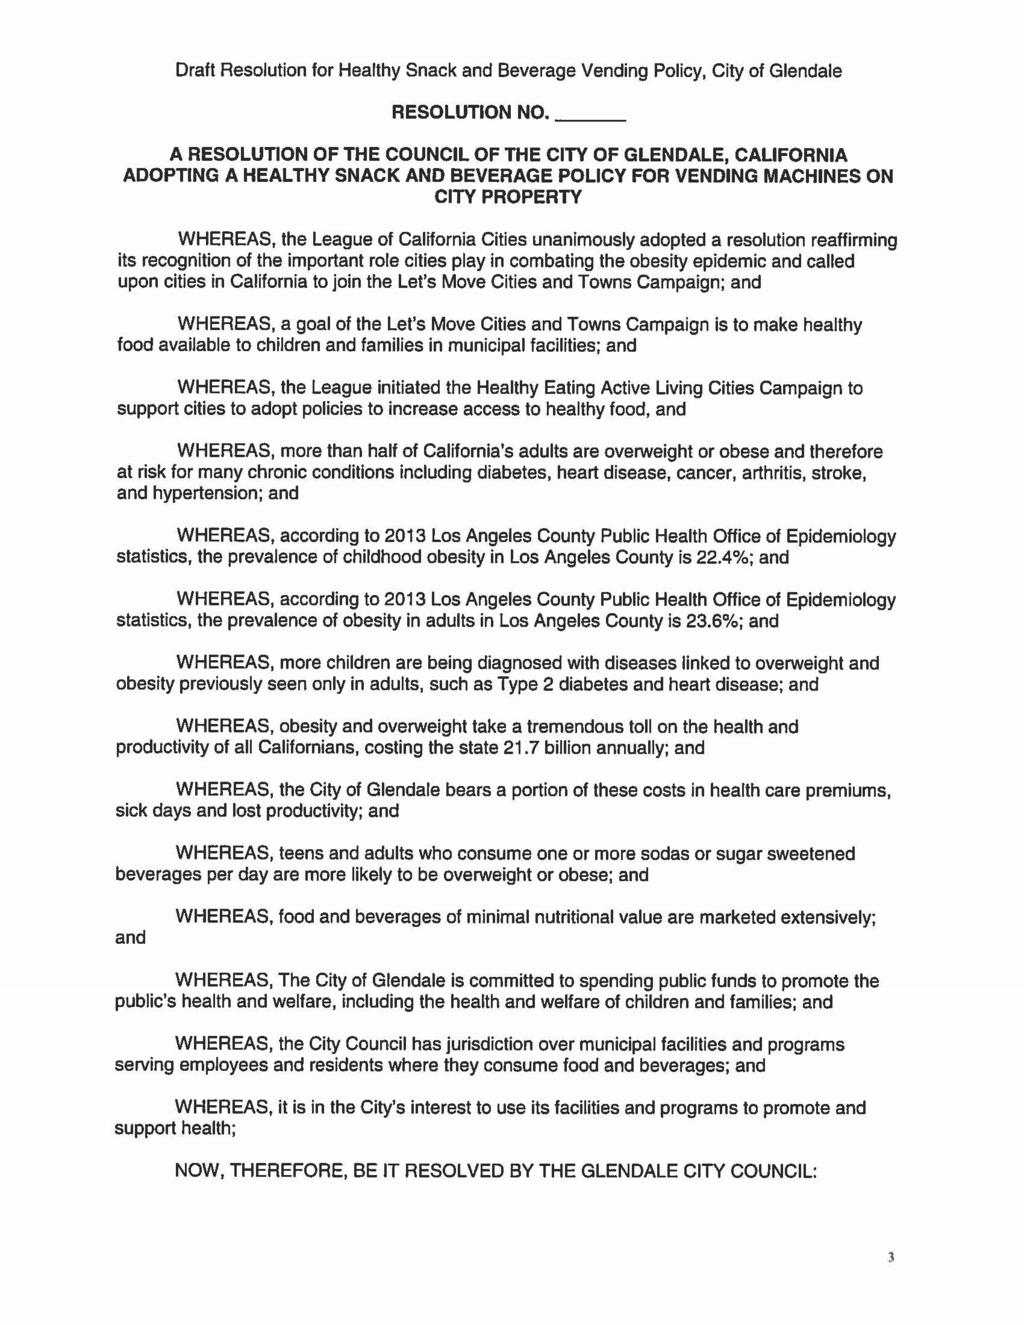 Draft Resolution for Healthy Snack and Beverage Vending Policy, City of Glendale RESOLUTION NO.